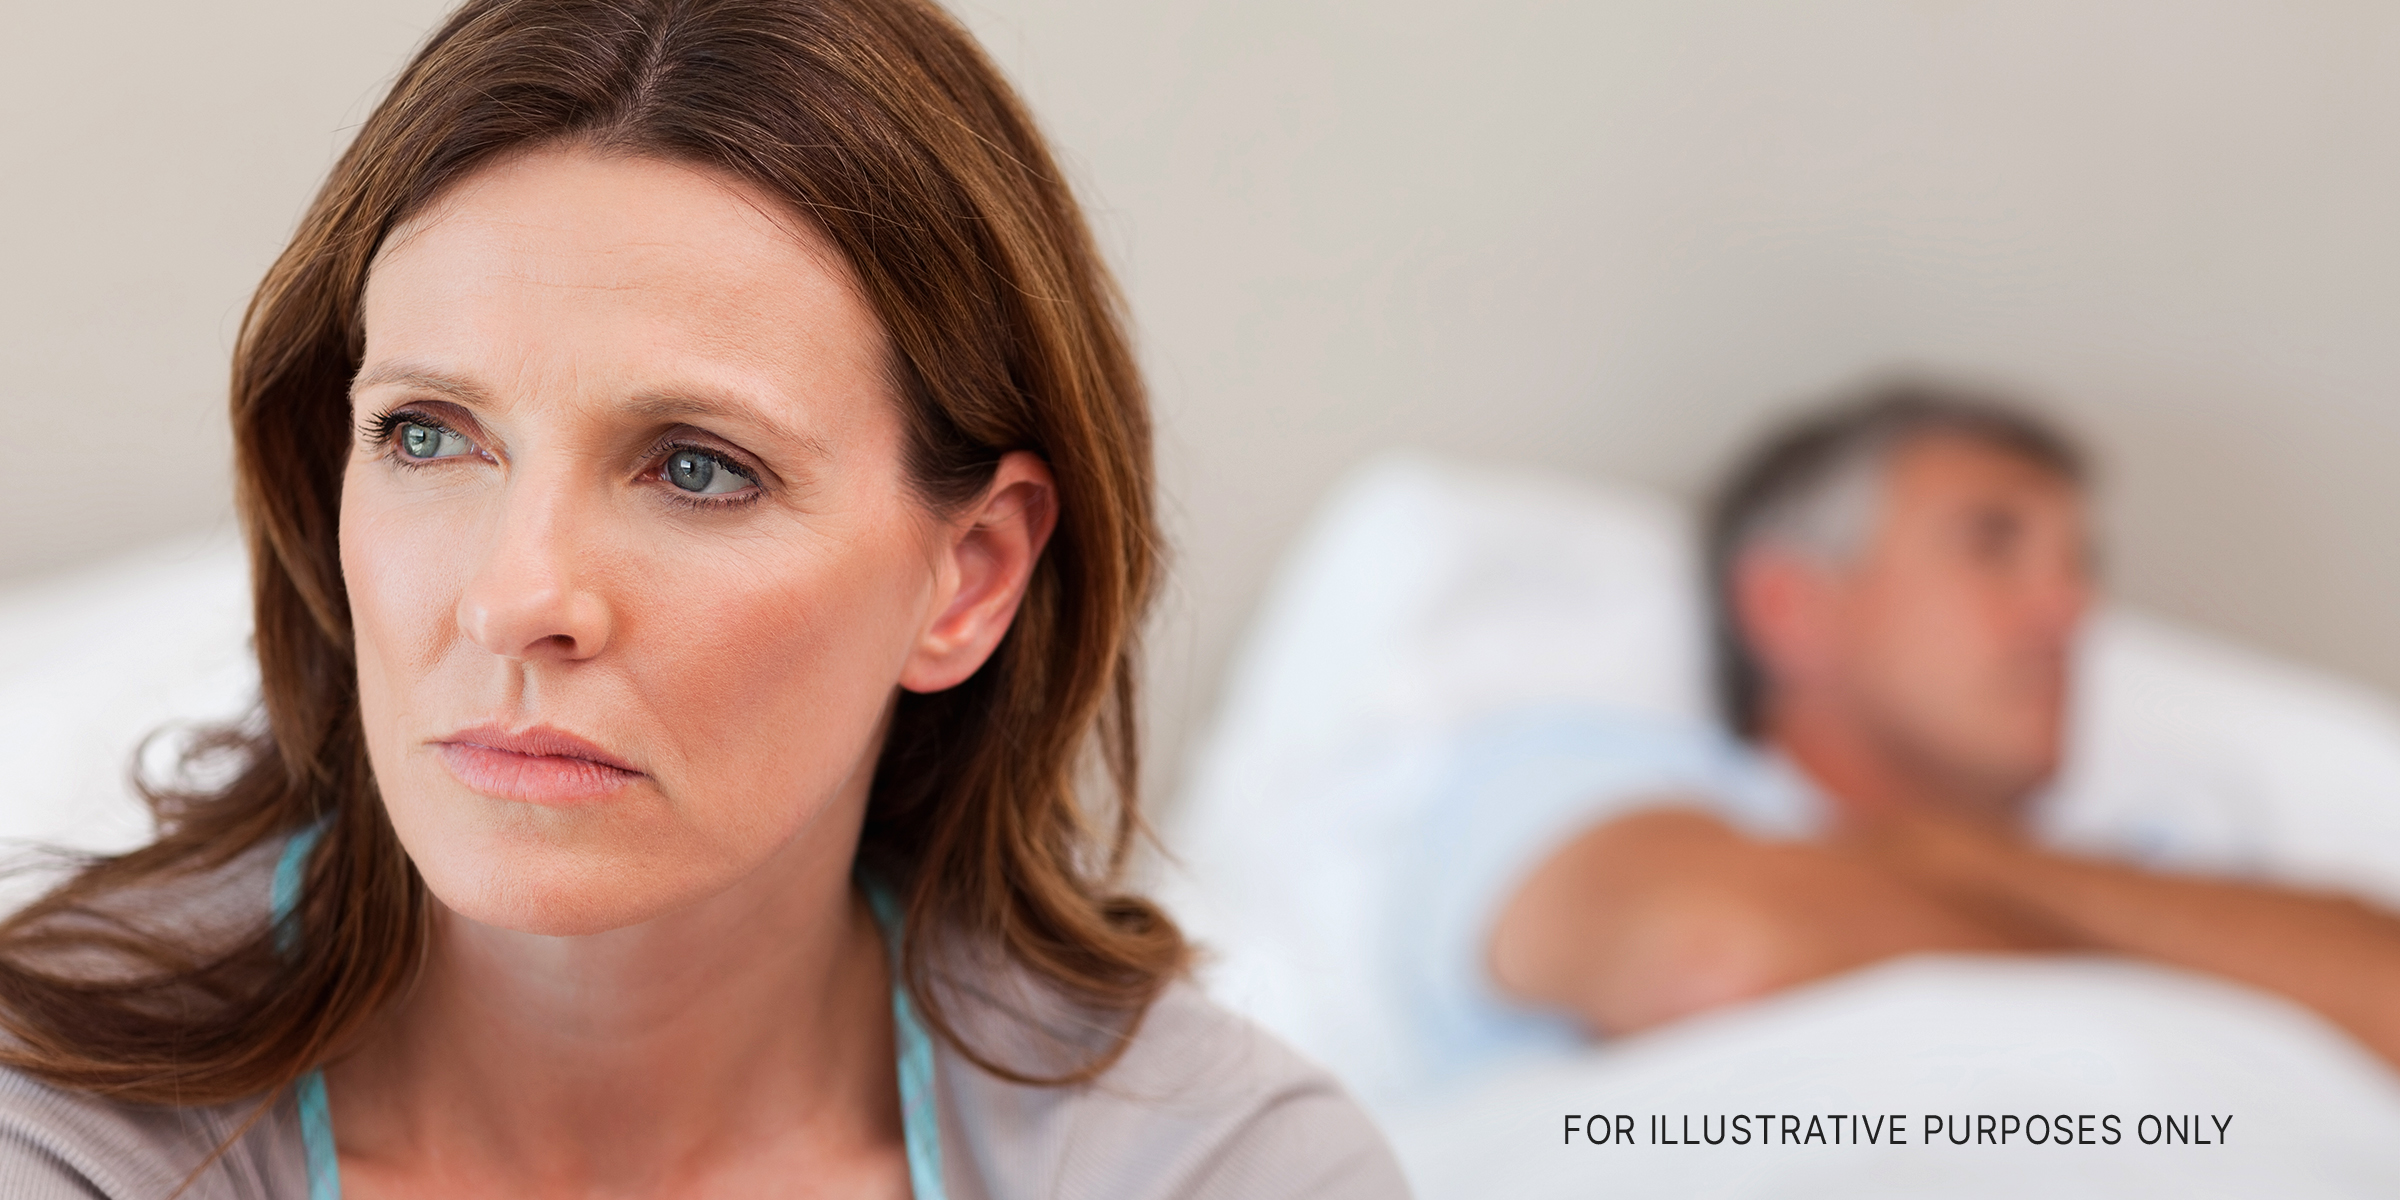 A woman looking sad with a man sleeping in the background | Source: Shutterstock